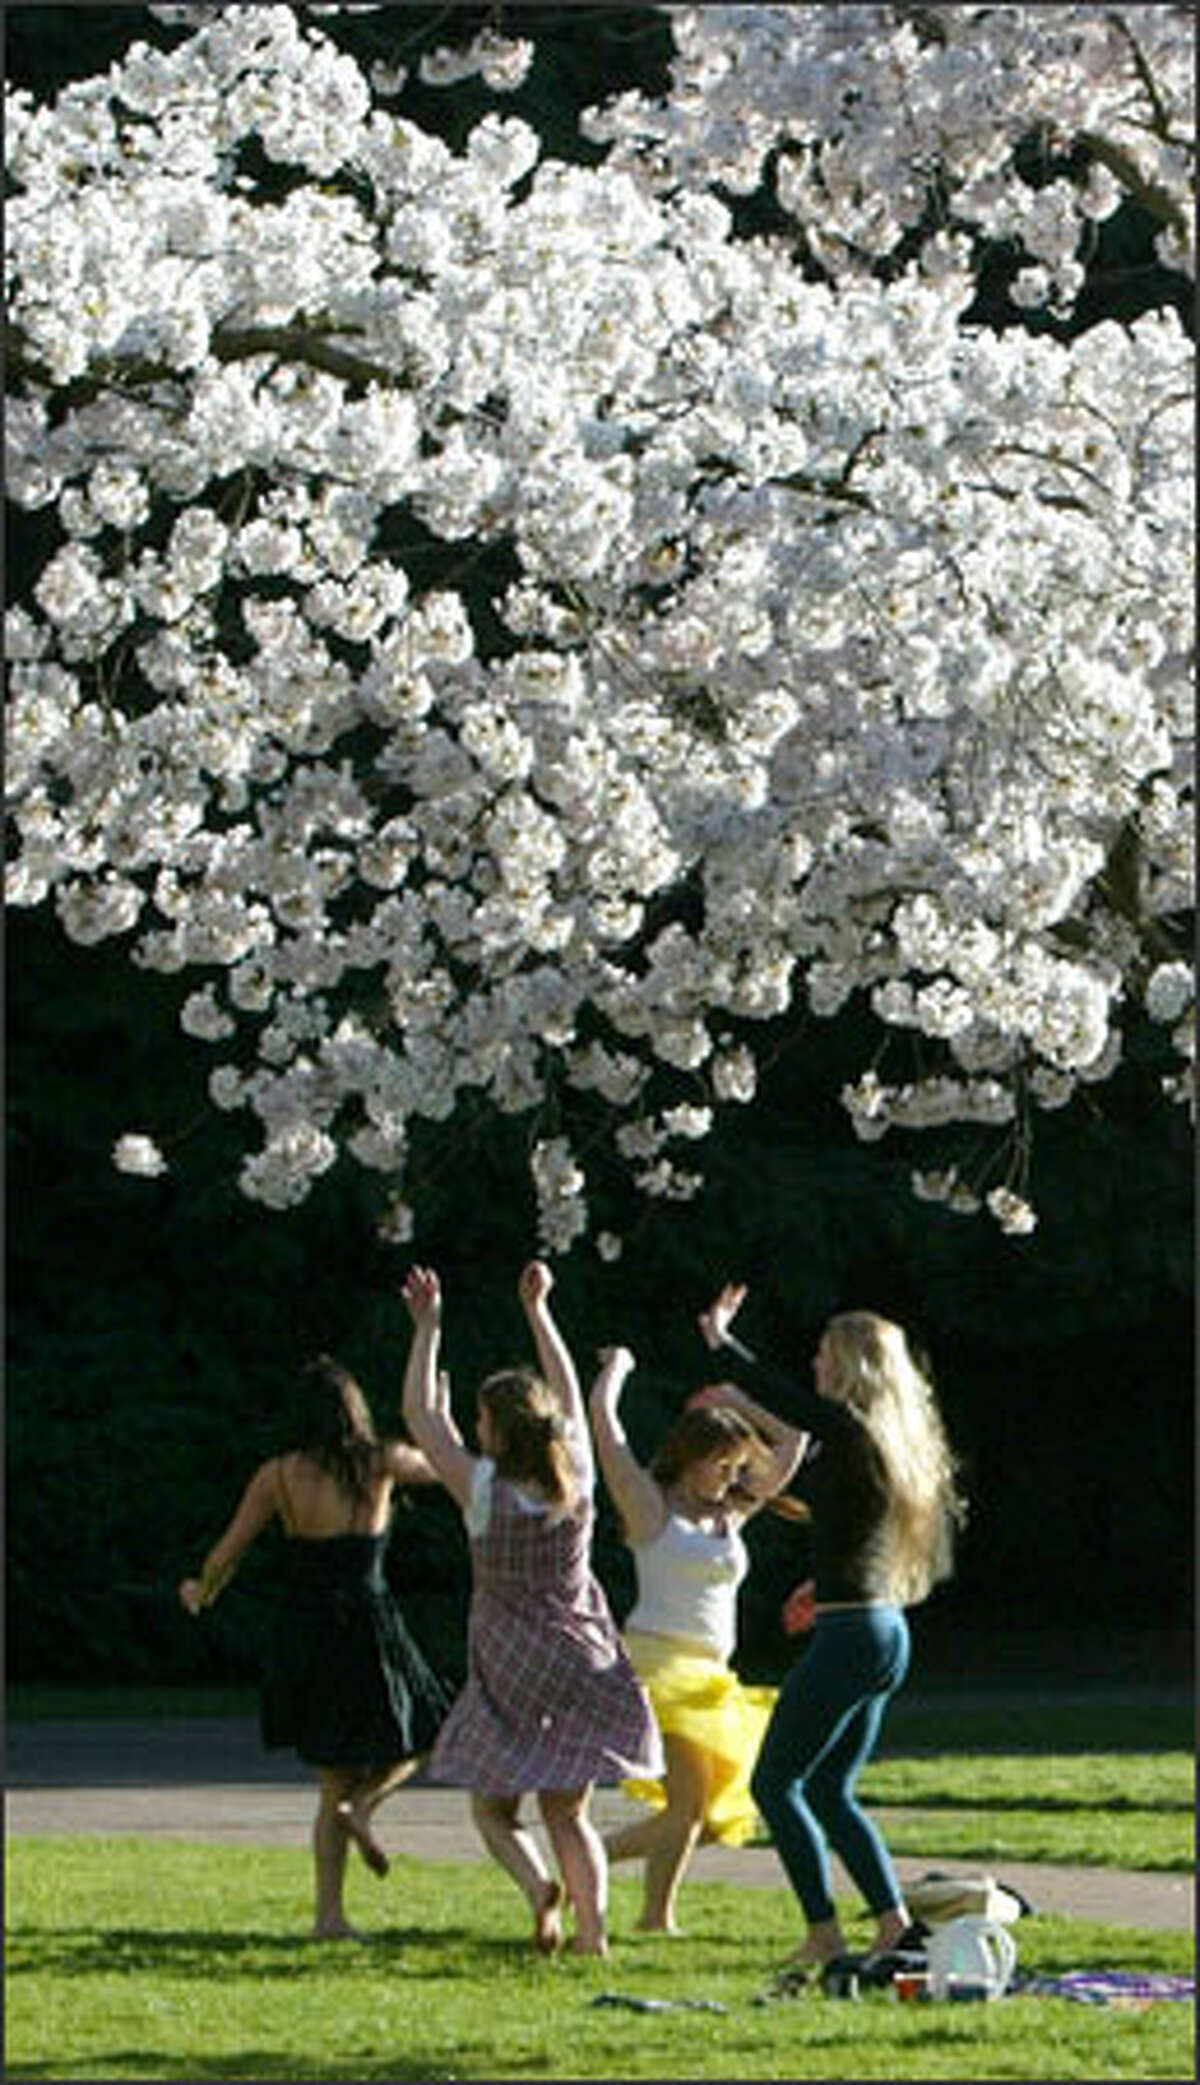 Cherry tree blossoms and sunshine greet students on their first day back on campus after the University of Washington's spring break. Dancing under the blossoms are, from left: Saki Jane Marsh, 20, a sophomore at Portland State University; and UW students Lucy Burnett, 18, a freshman; sophomore Megan Sandoz, 19; and freshman Katie Kassa, 19.